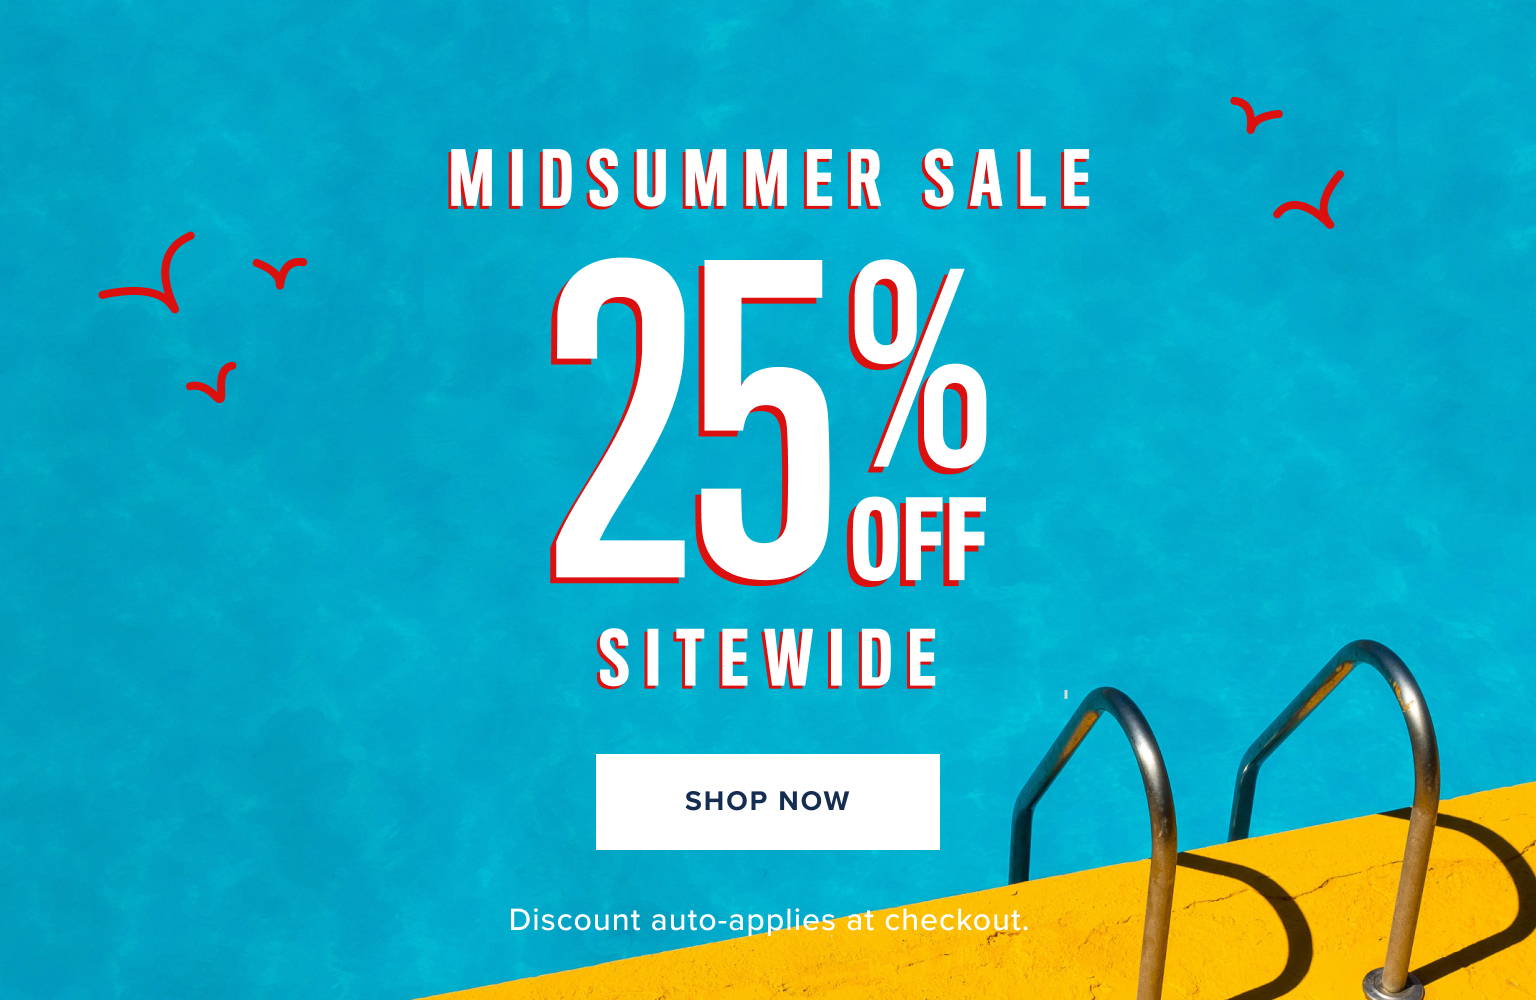 Midsummer sale. 25% off sitewide. Discount auto applies at checkout